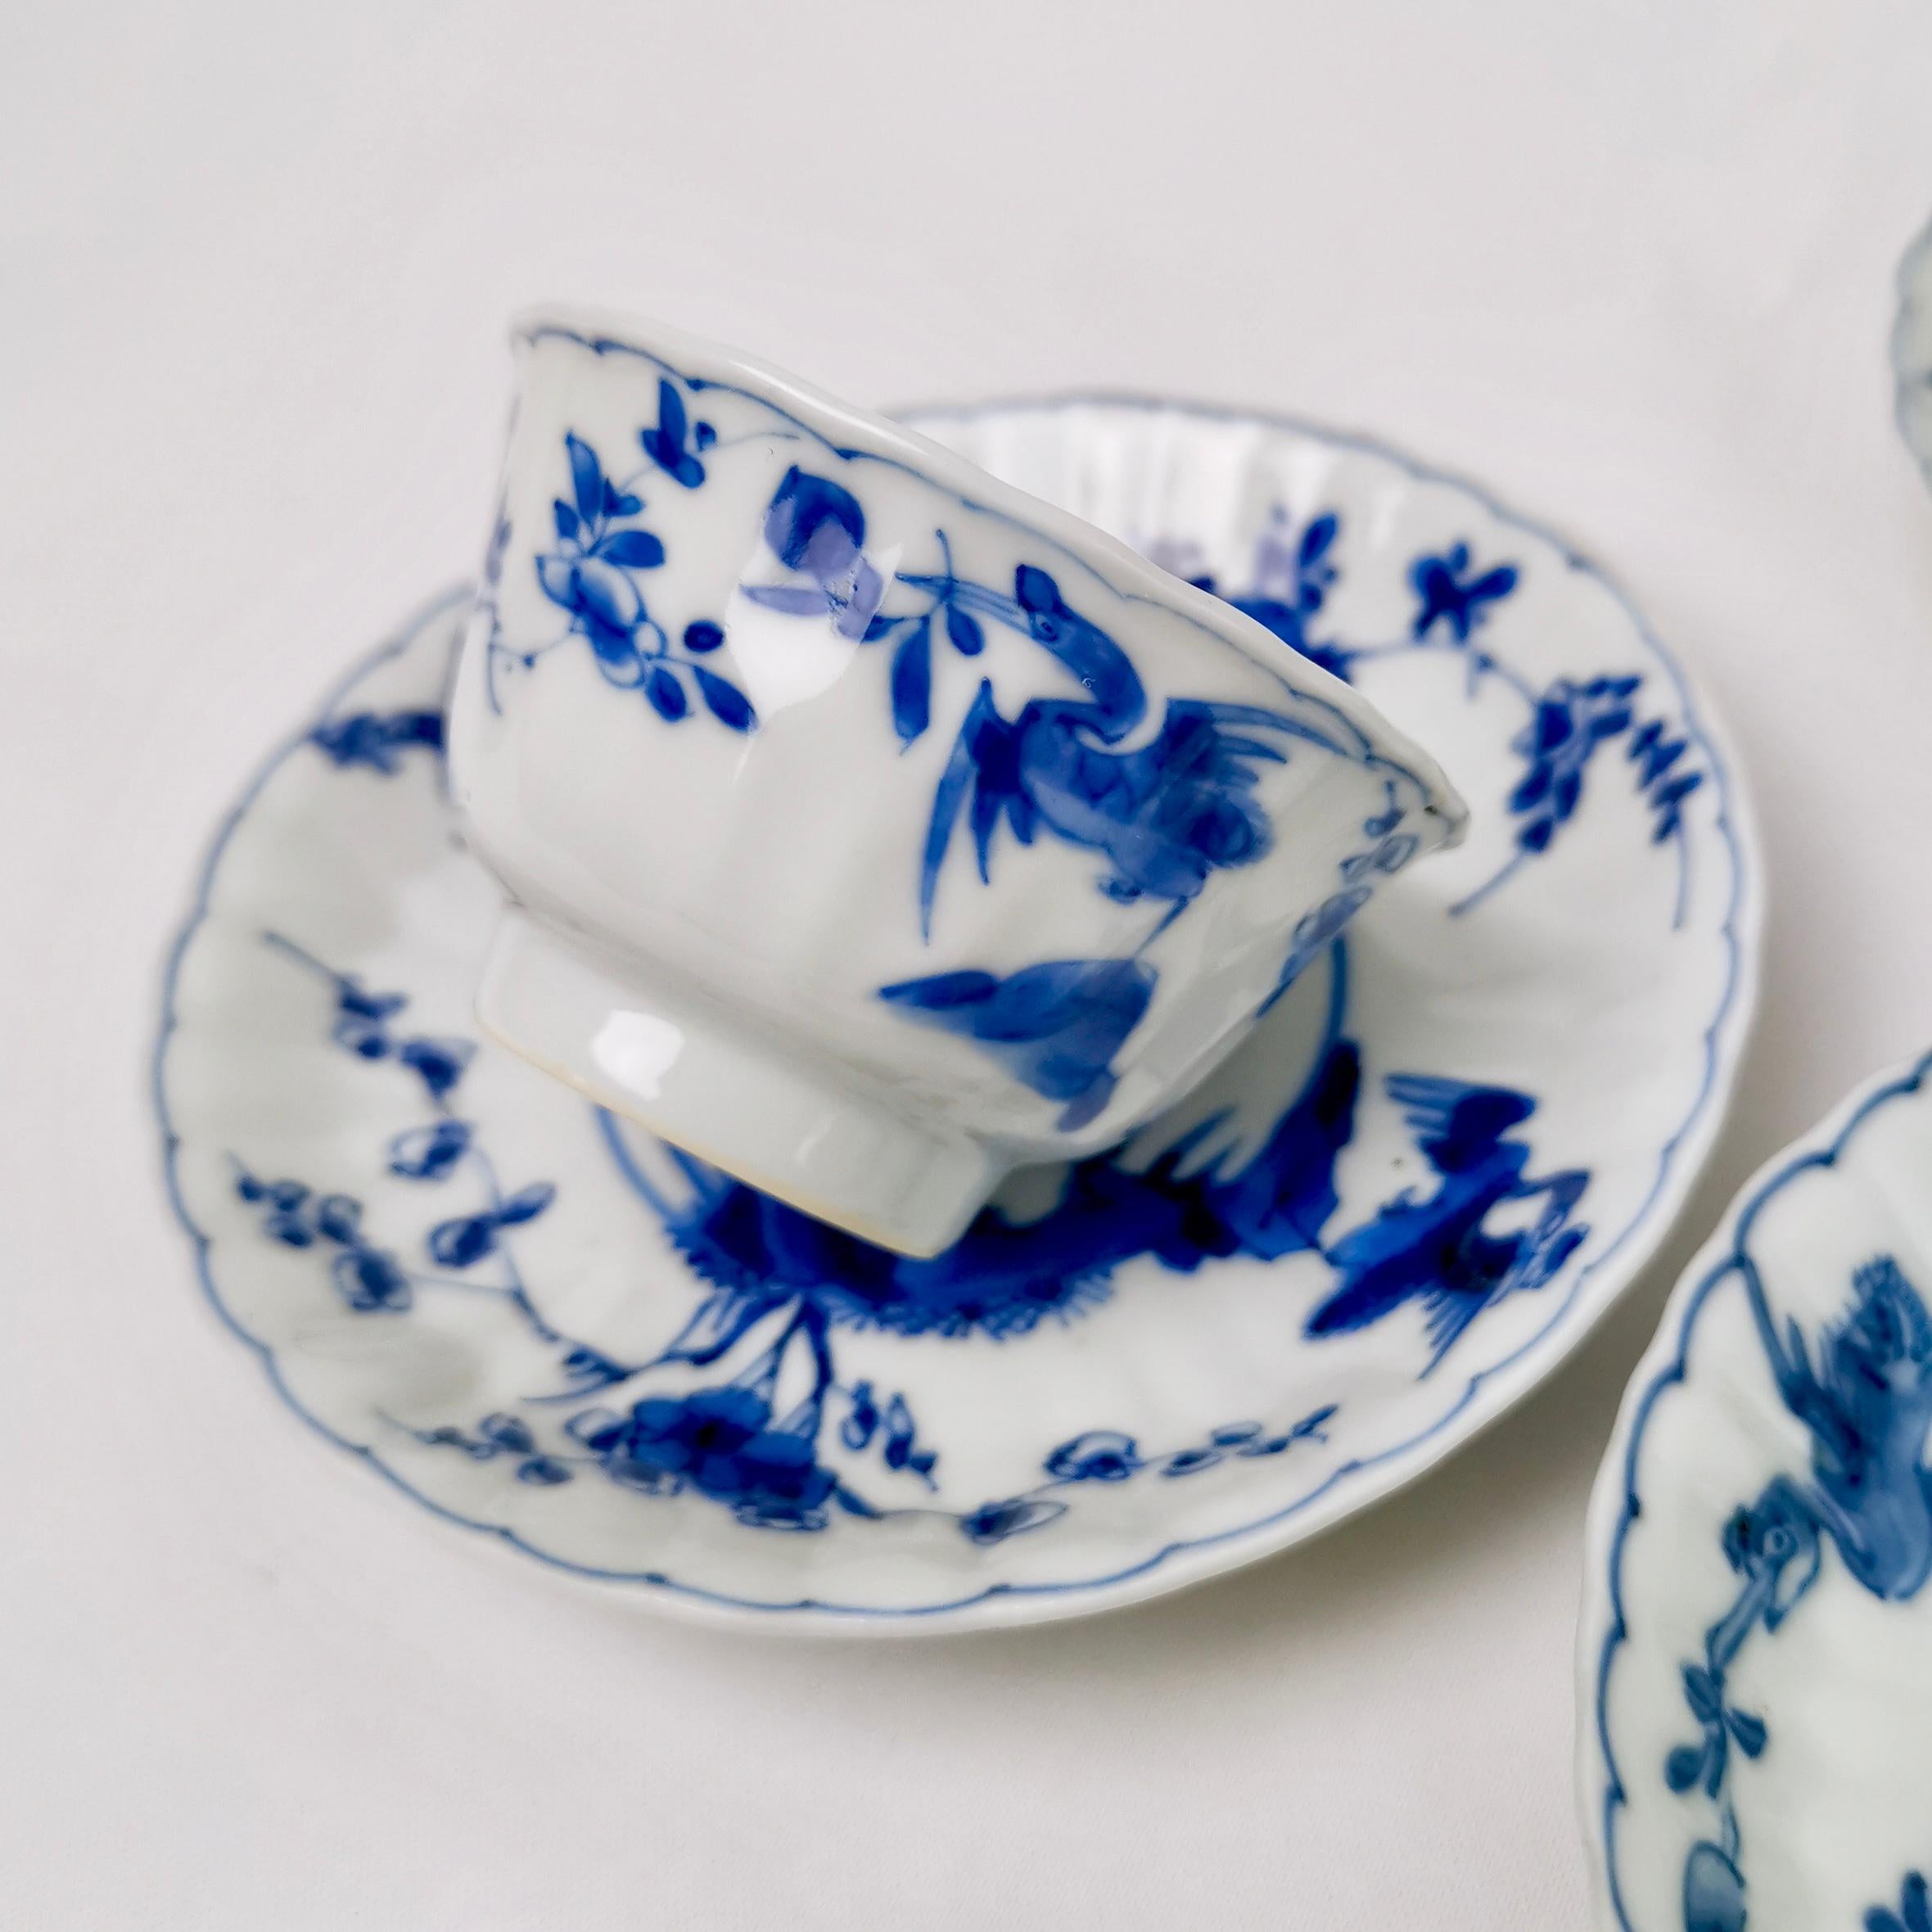 Hand-Painted Set of Chinese Export Tea Bowls, Rabbits and Cranes, 19th Century Kraak Style